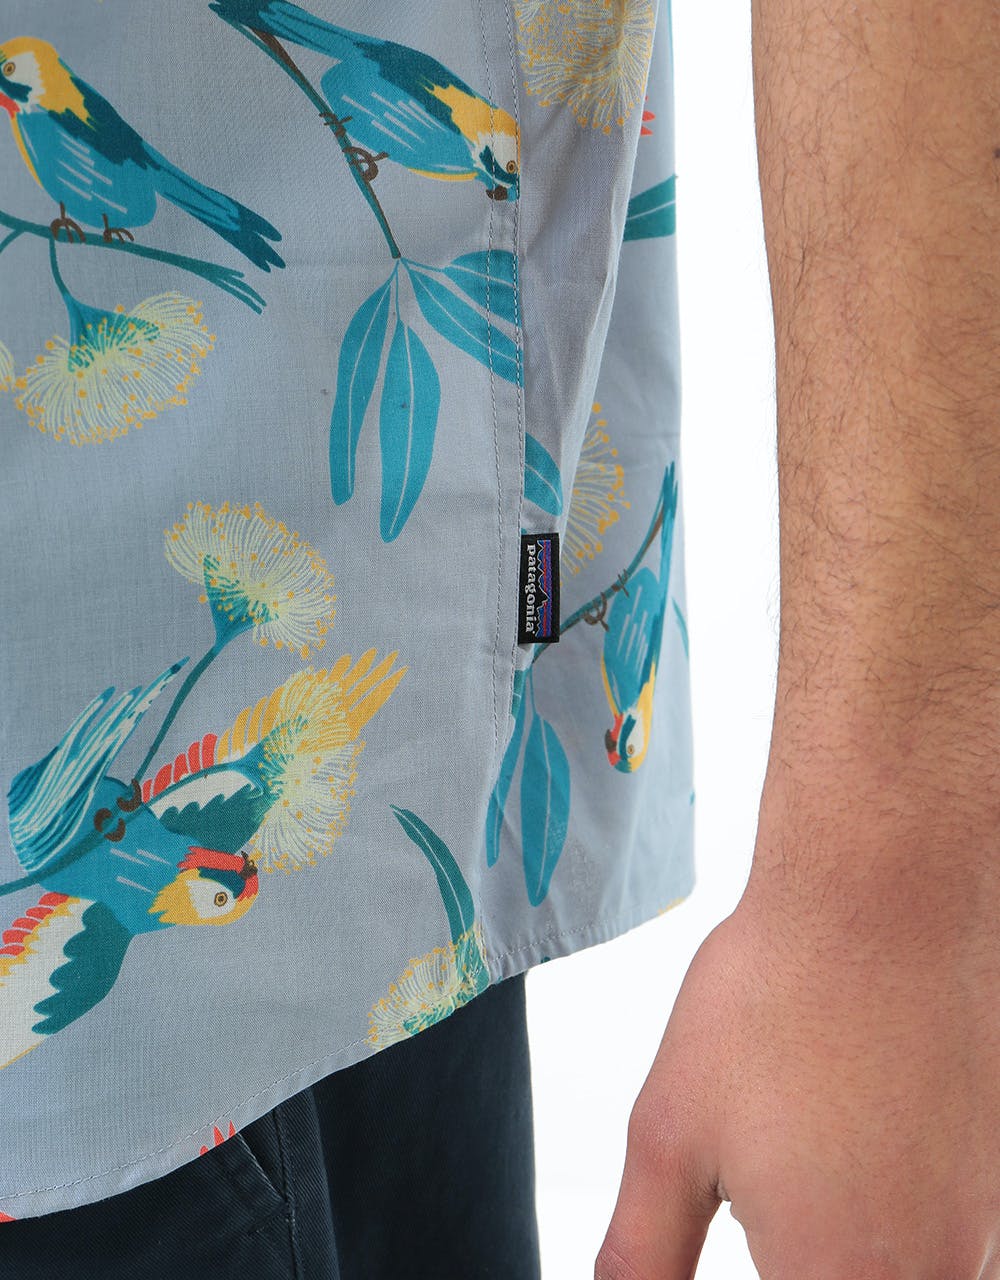 Patagonia Go To S/S Shirt - Parrots: Ghost Purple